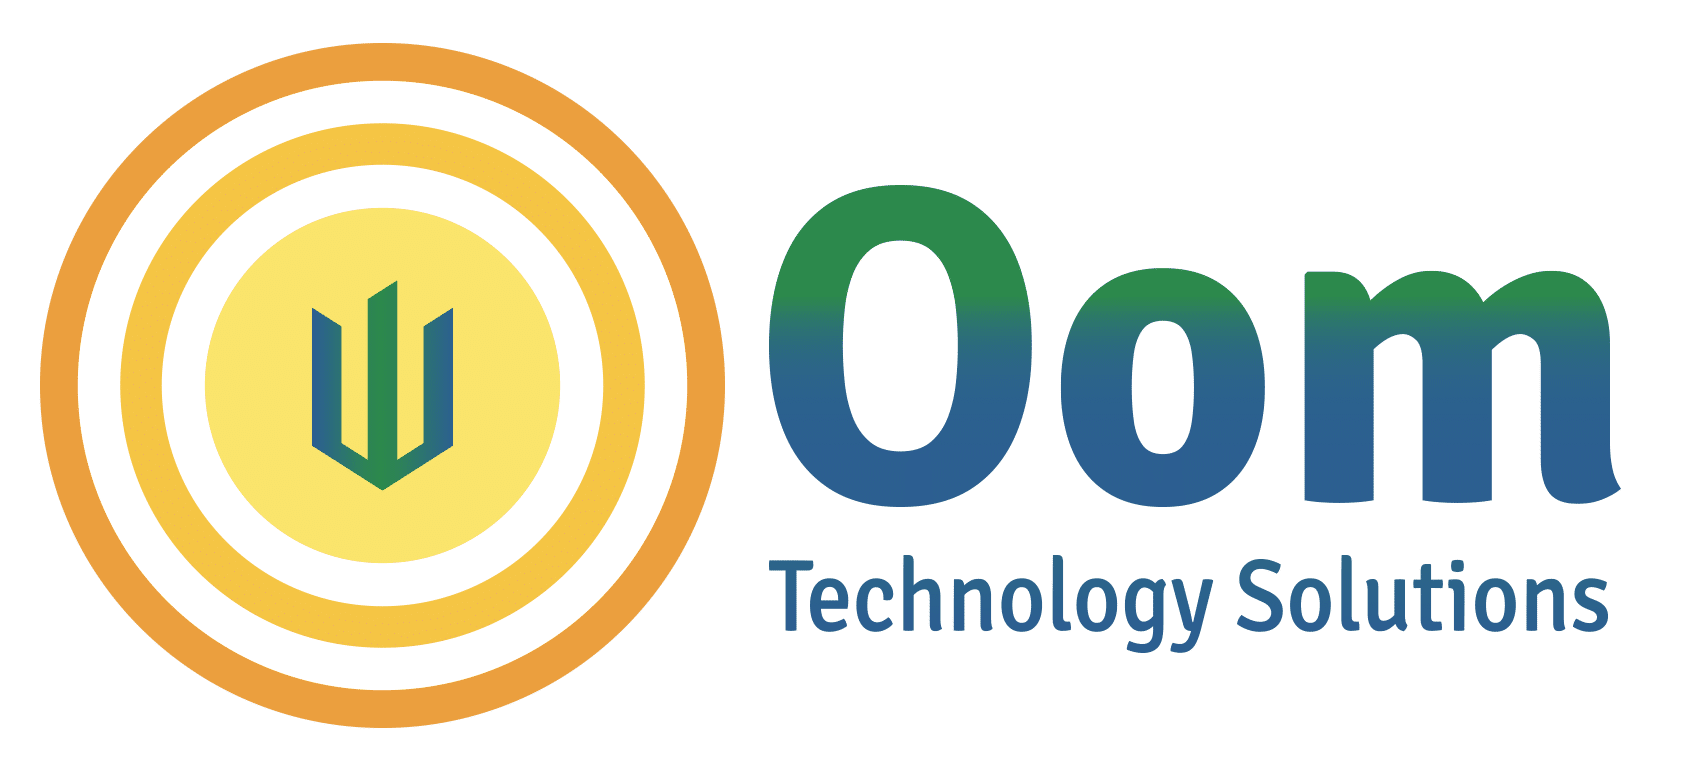 Oom Technology Solutions